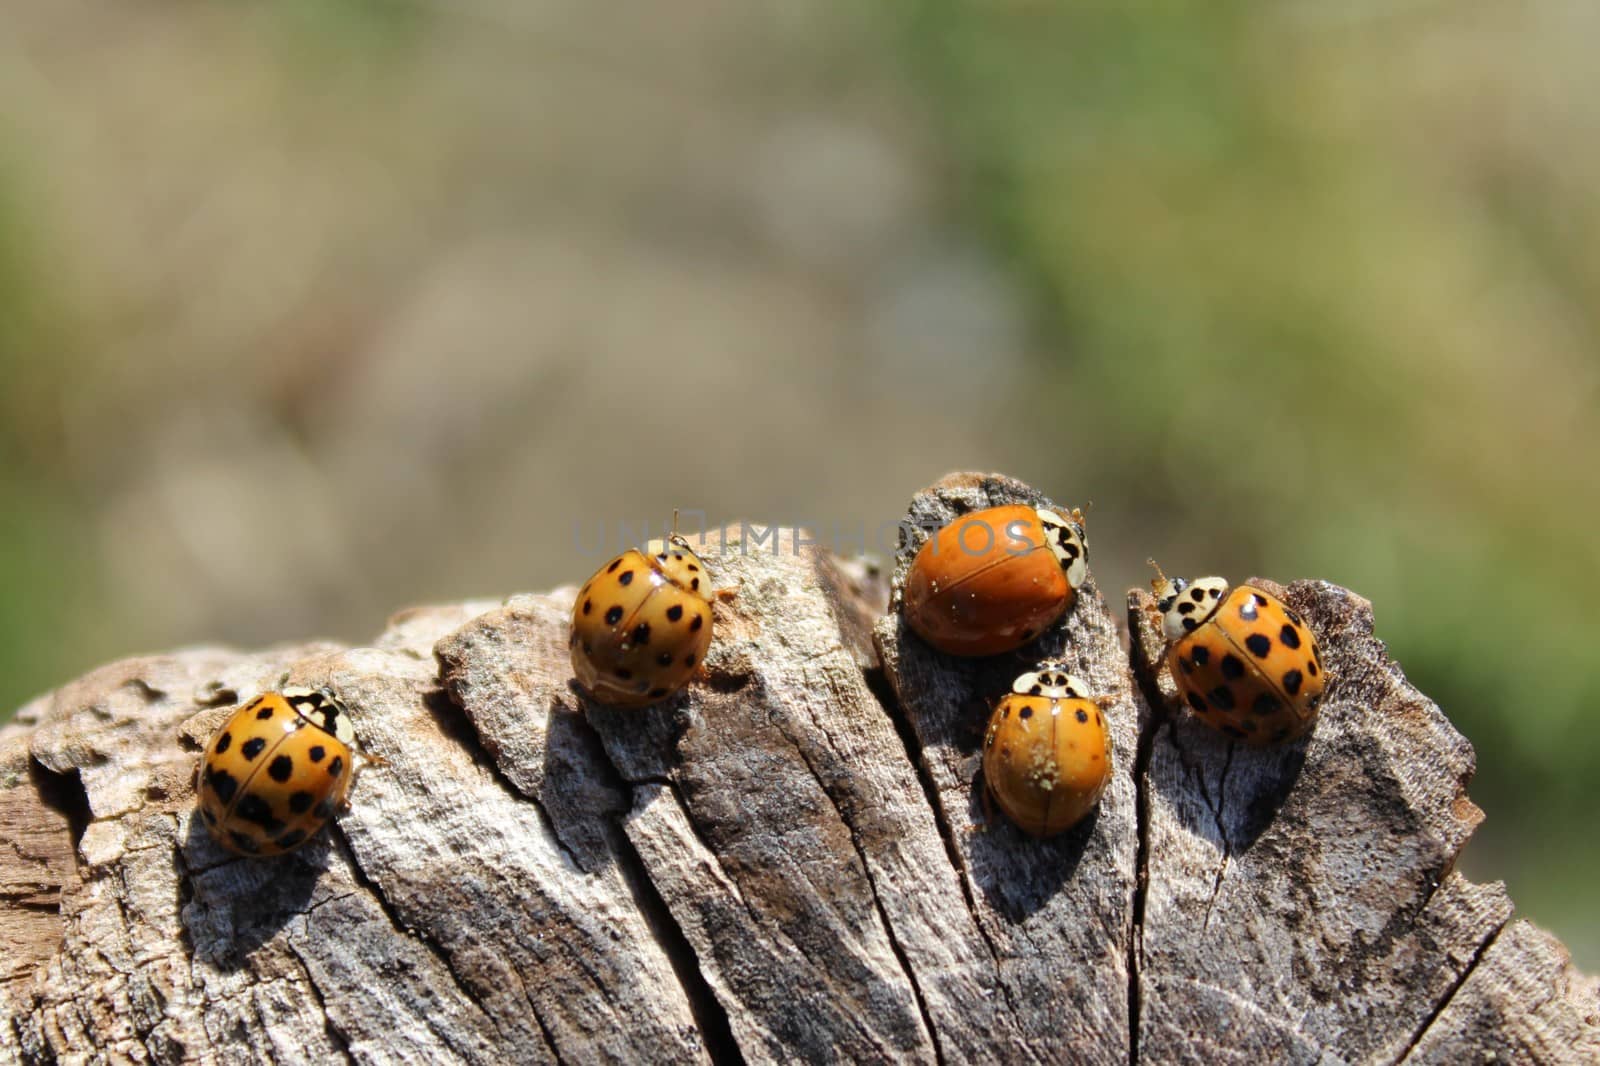 The picture shows many ladybirds on a tree trunk